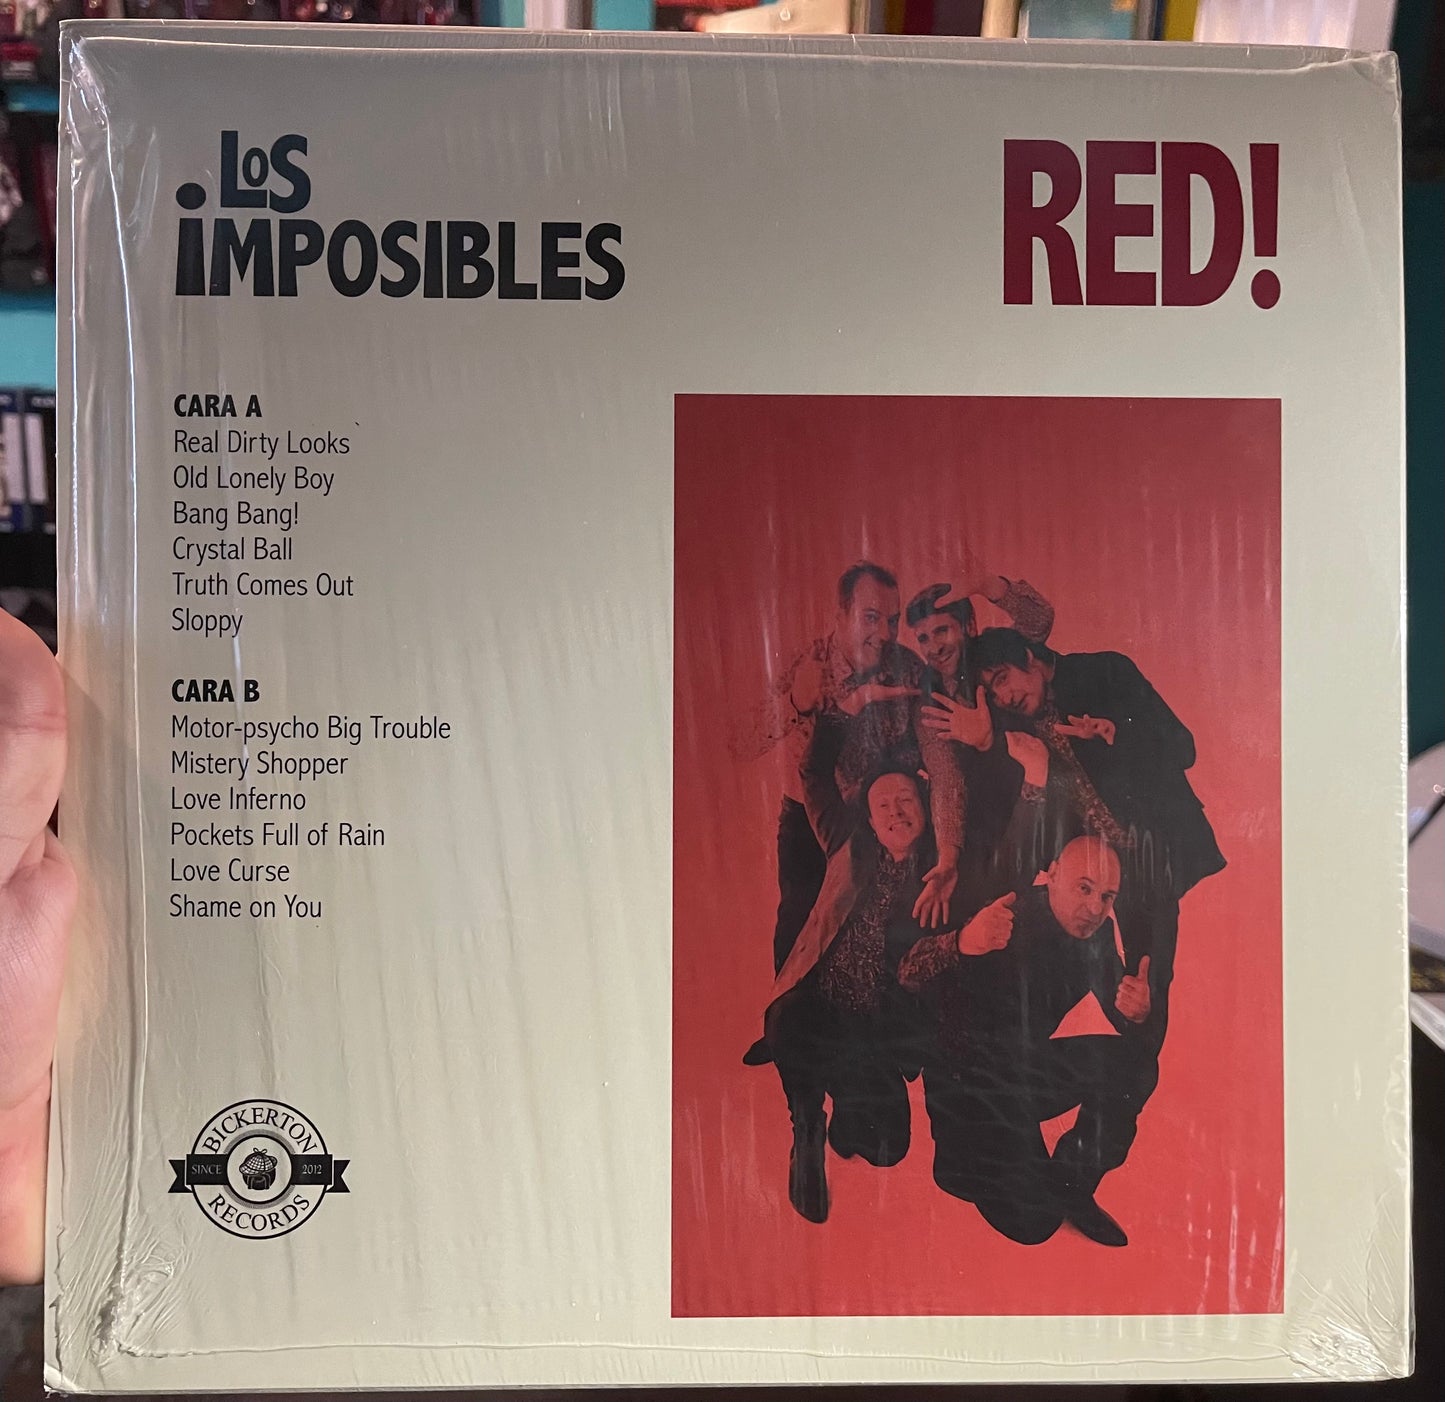 OMRDST-020 Los Imposibles “Red” LP (Import)